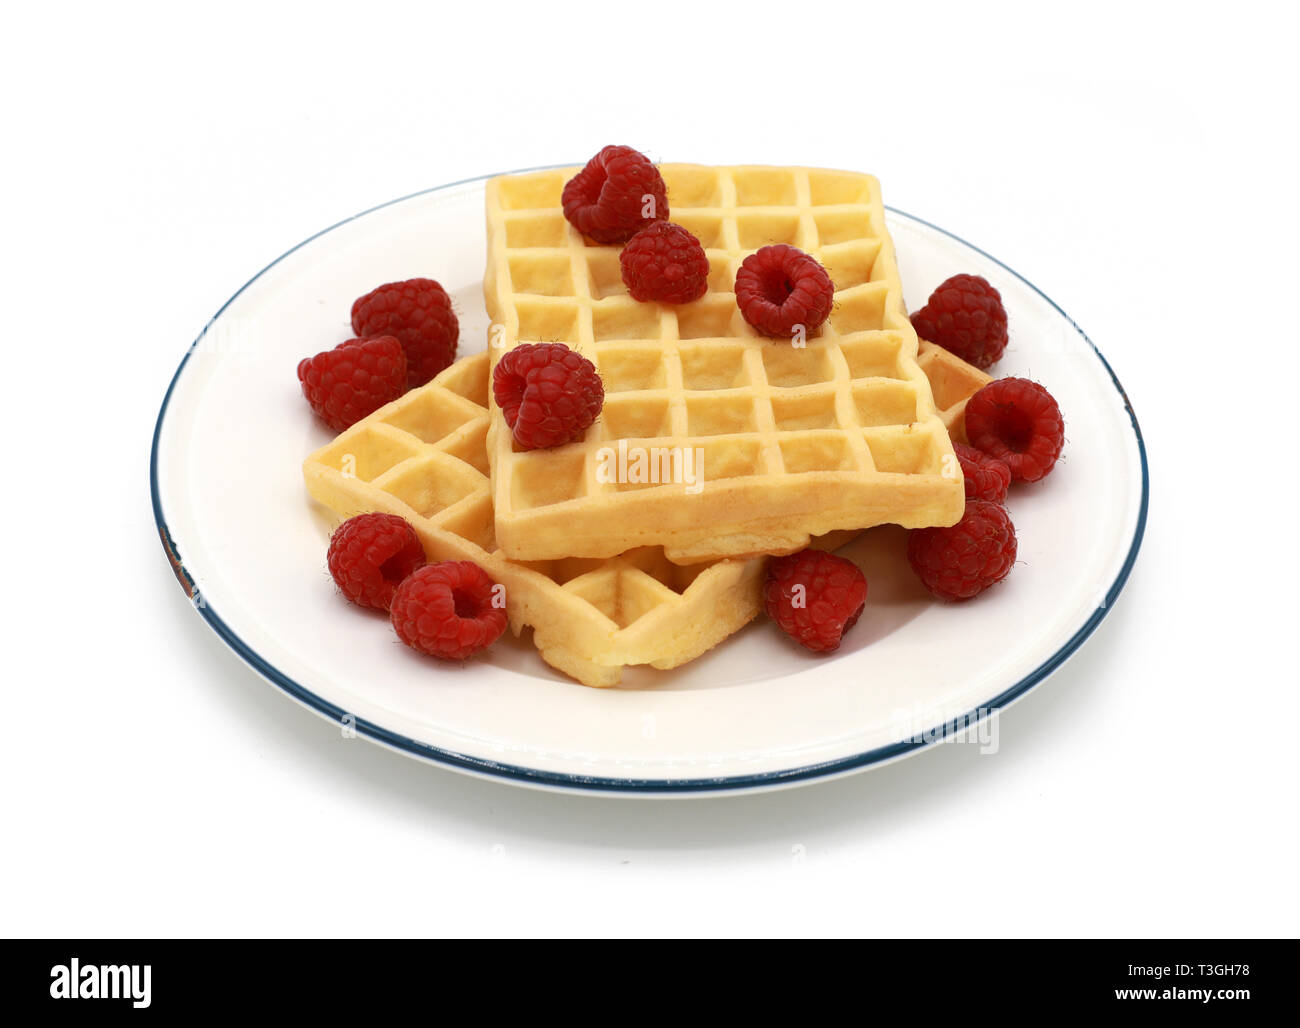 fresh belgian waffles with raspberrys on a plate isolated on white background Stock Photo